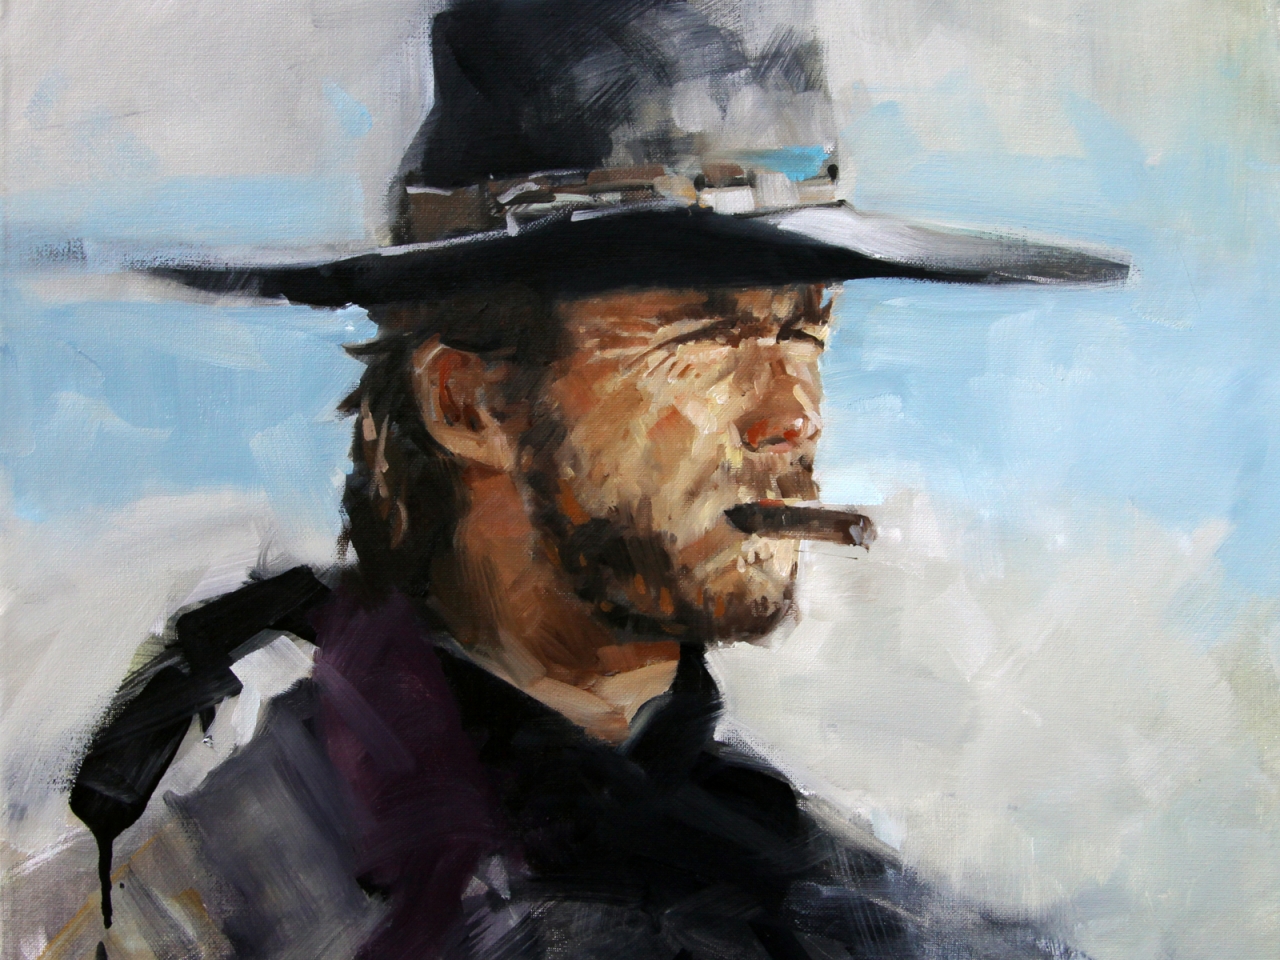 Clint Eastwood Painting for 1280 x 960 resolution